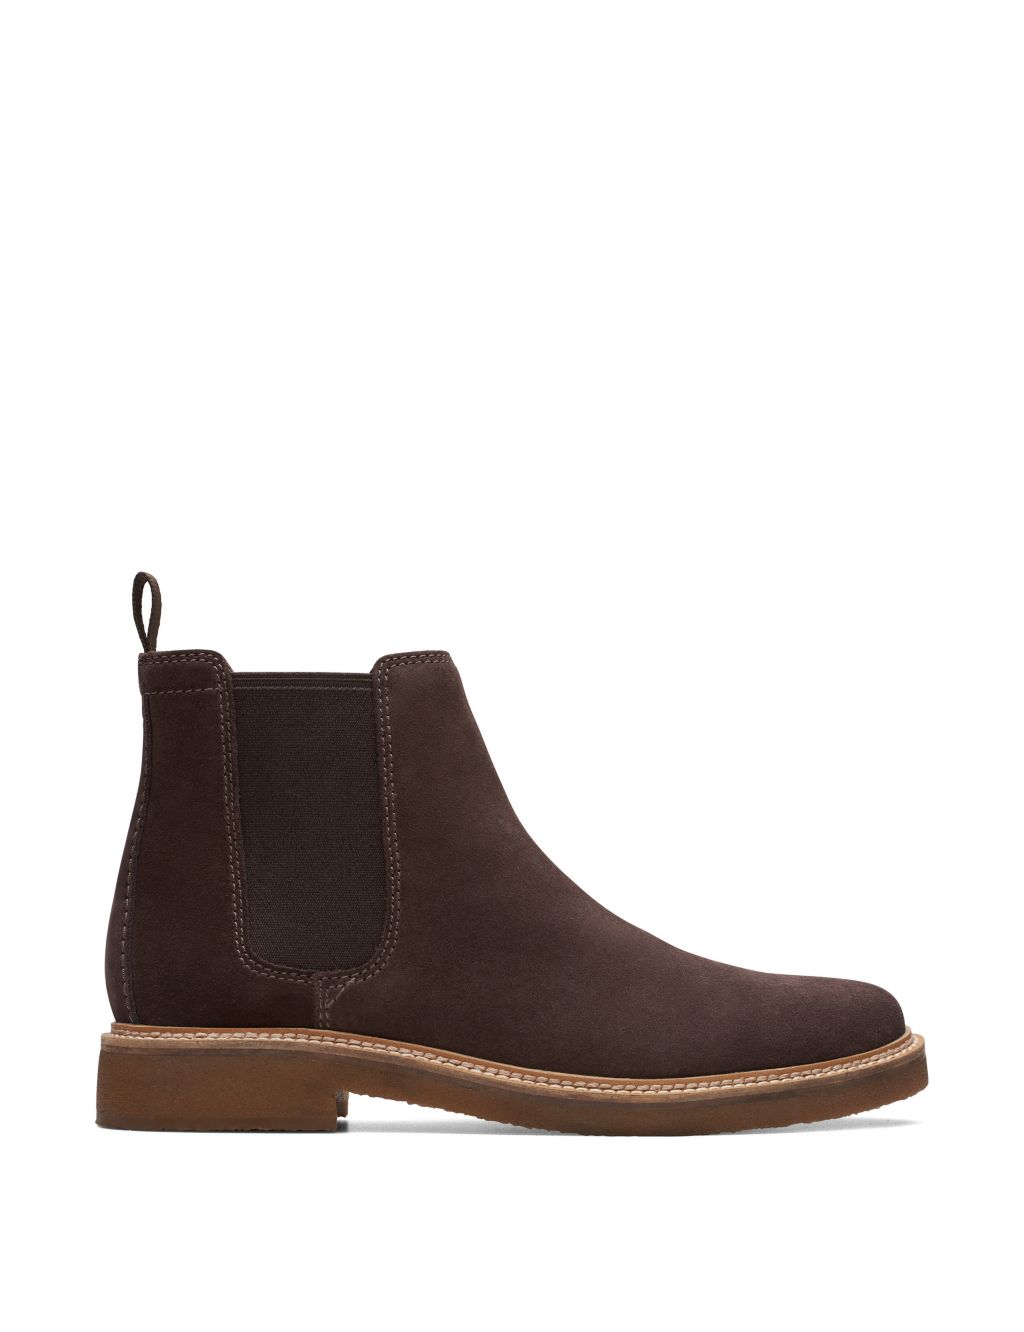 Suede Chelsea Boots image 1